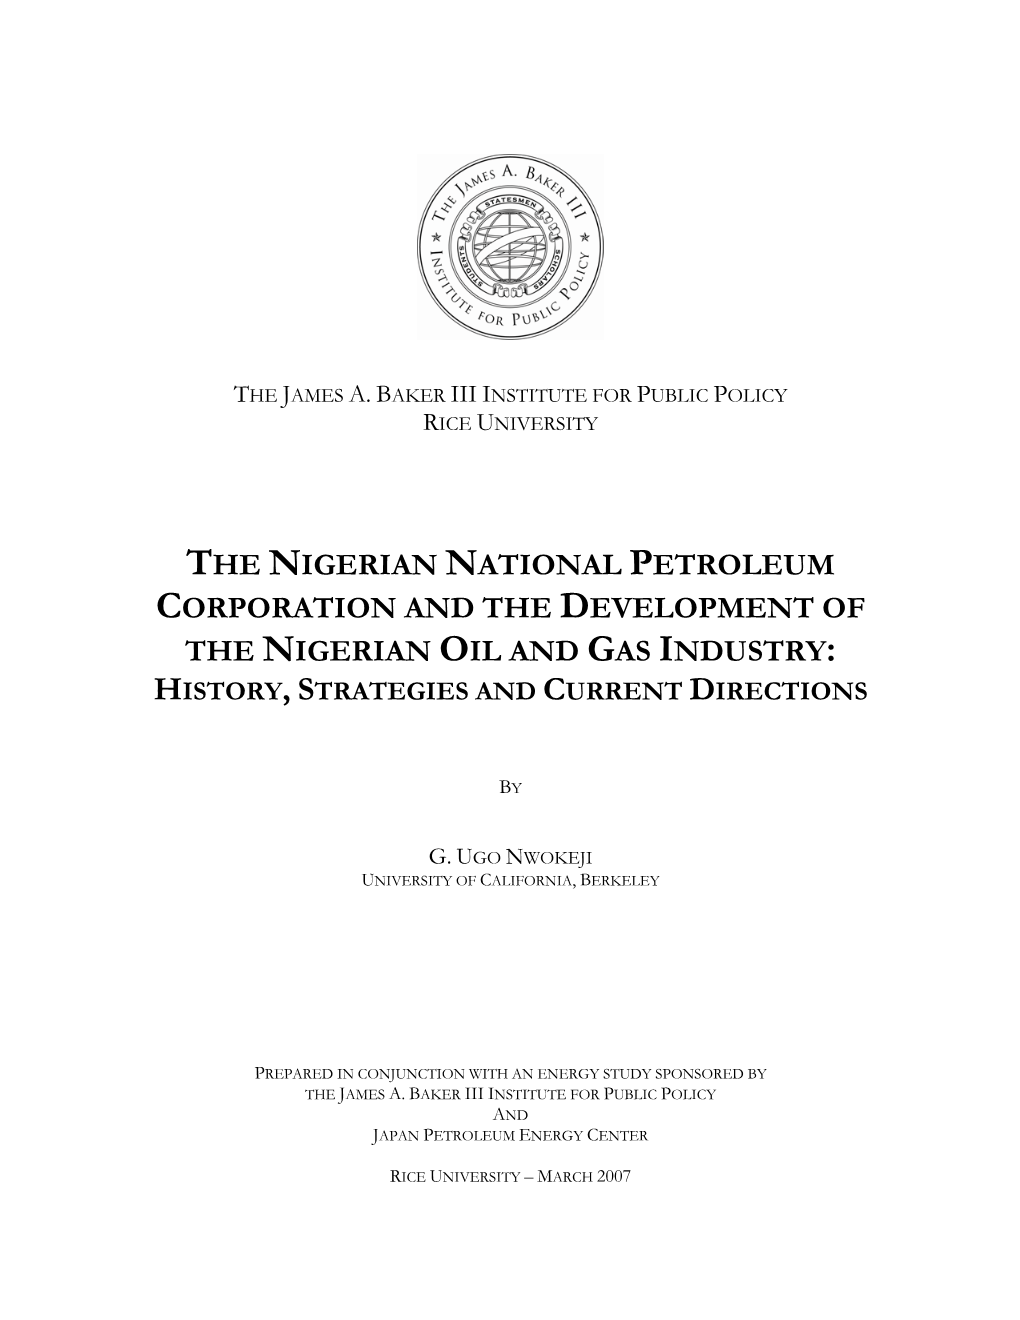 The Nigerian National Petroleum Corporation and the Development of the Nigerian Oil and Gas Industry: History, Strategies and Current Directions